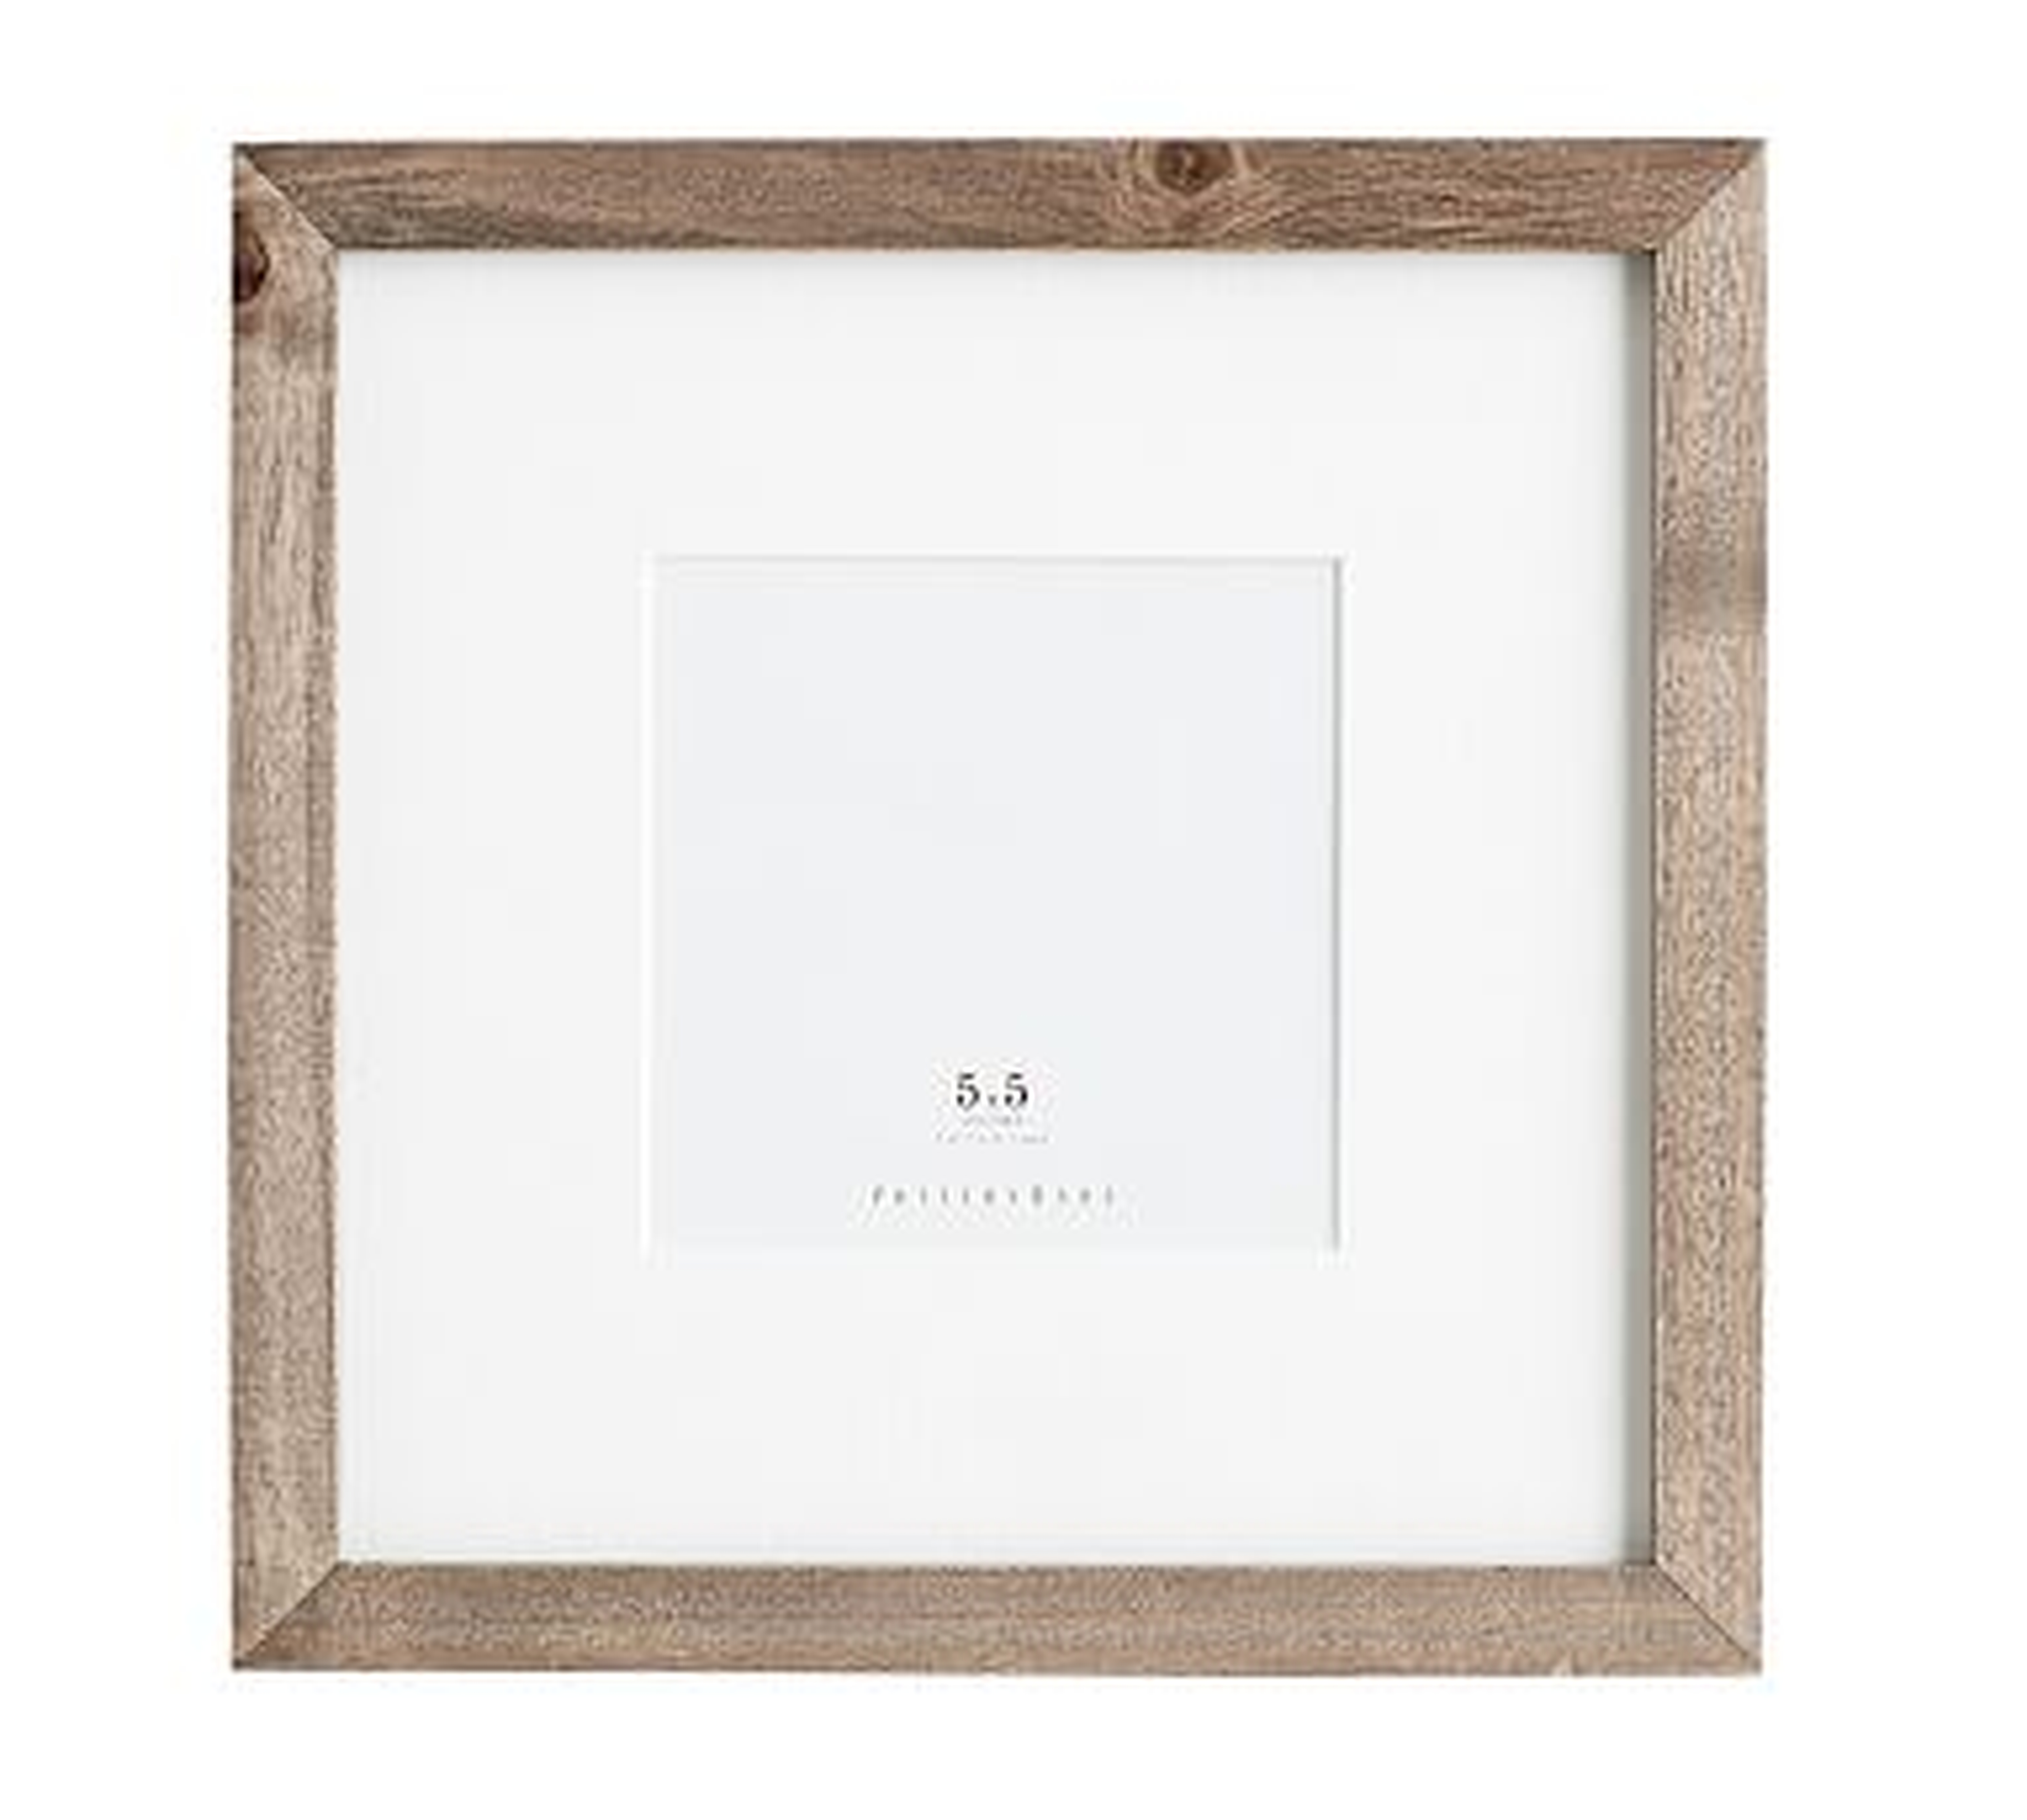 Wood Gallery Single Opening Frame - 5x5 (10x10 overall) - Gray - Pottery Barn